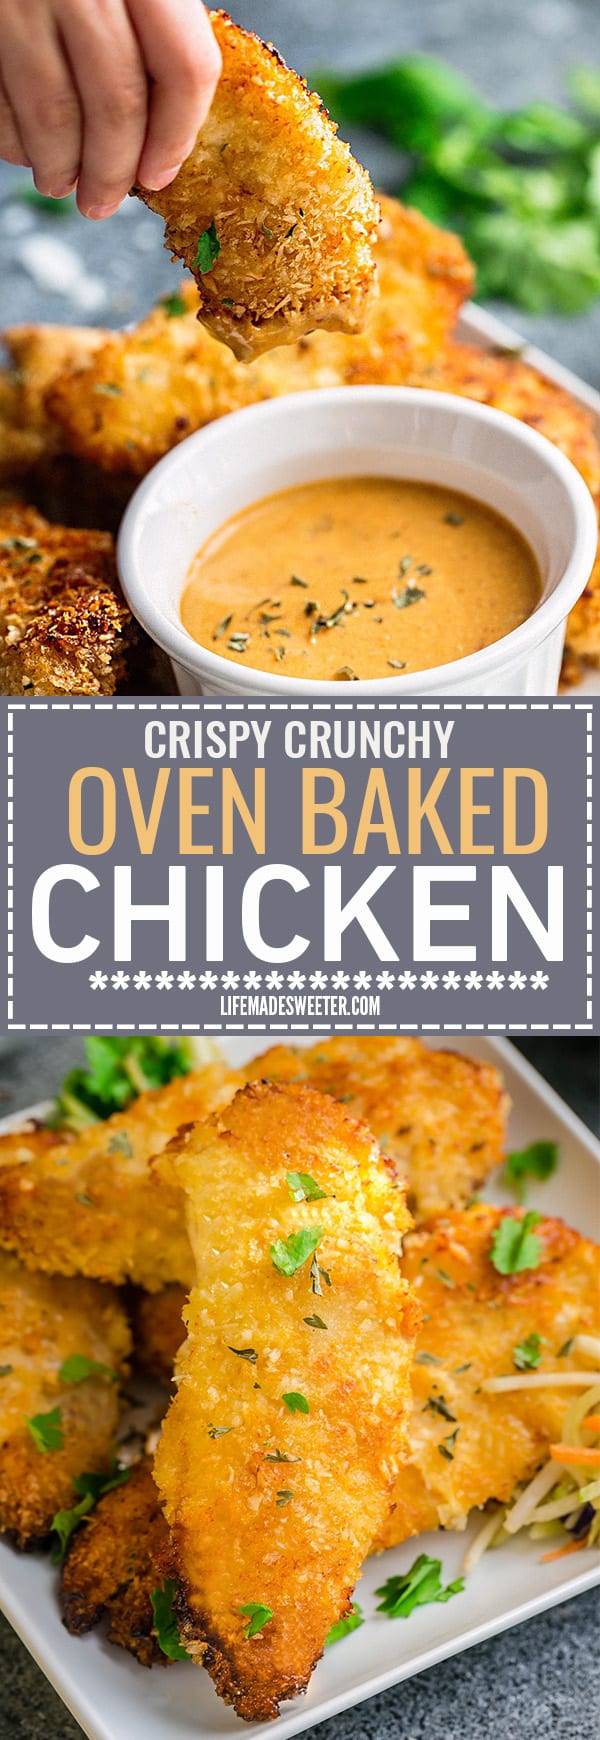 This Oven Baked Chicken Recipe makes perfectly crispy chicken that is juicy and flavorful. The best part of all is how EASY they are so you can skip that takeout stop to KFC and make them at home.